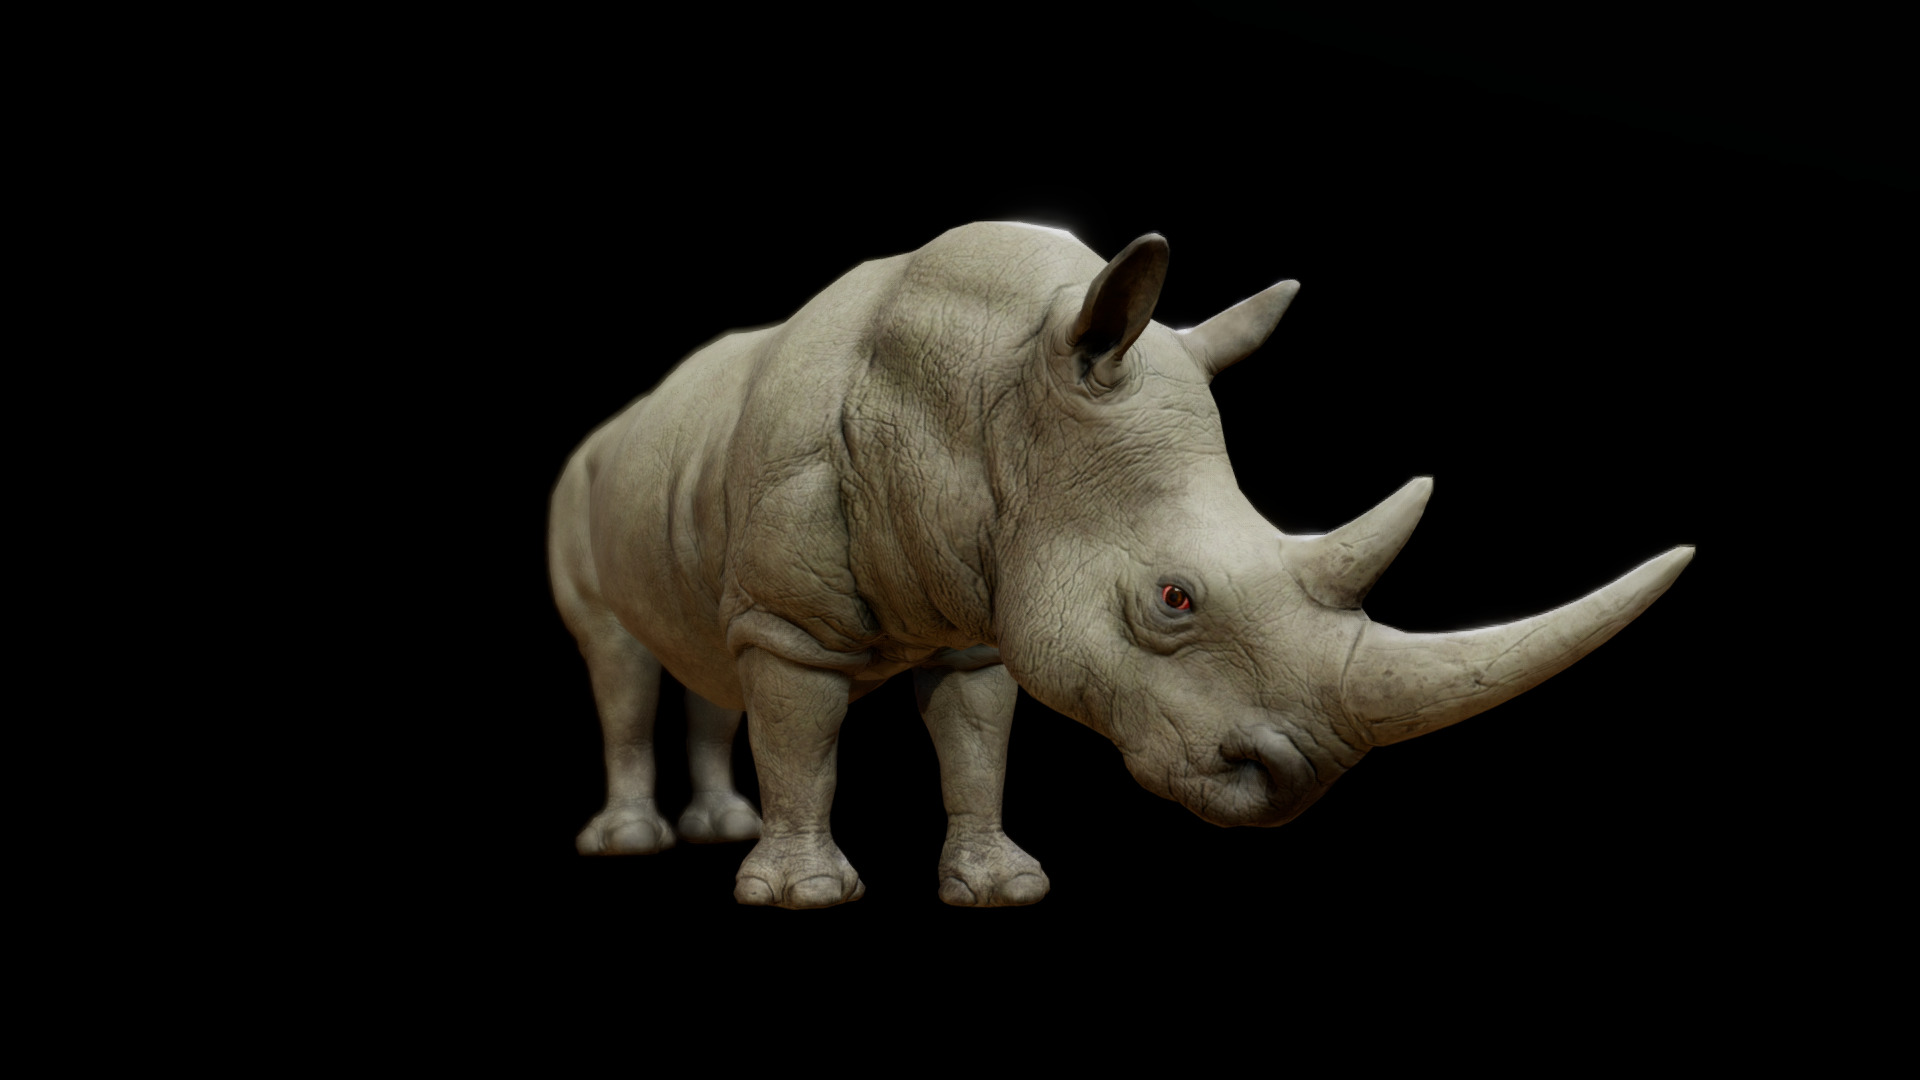 3D model RHINOCEROS ANIMATIONS - This is a 3D model of the RHINOCEROS ANIMATIONS. The 3D model is about a toy animal with horns.